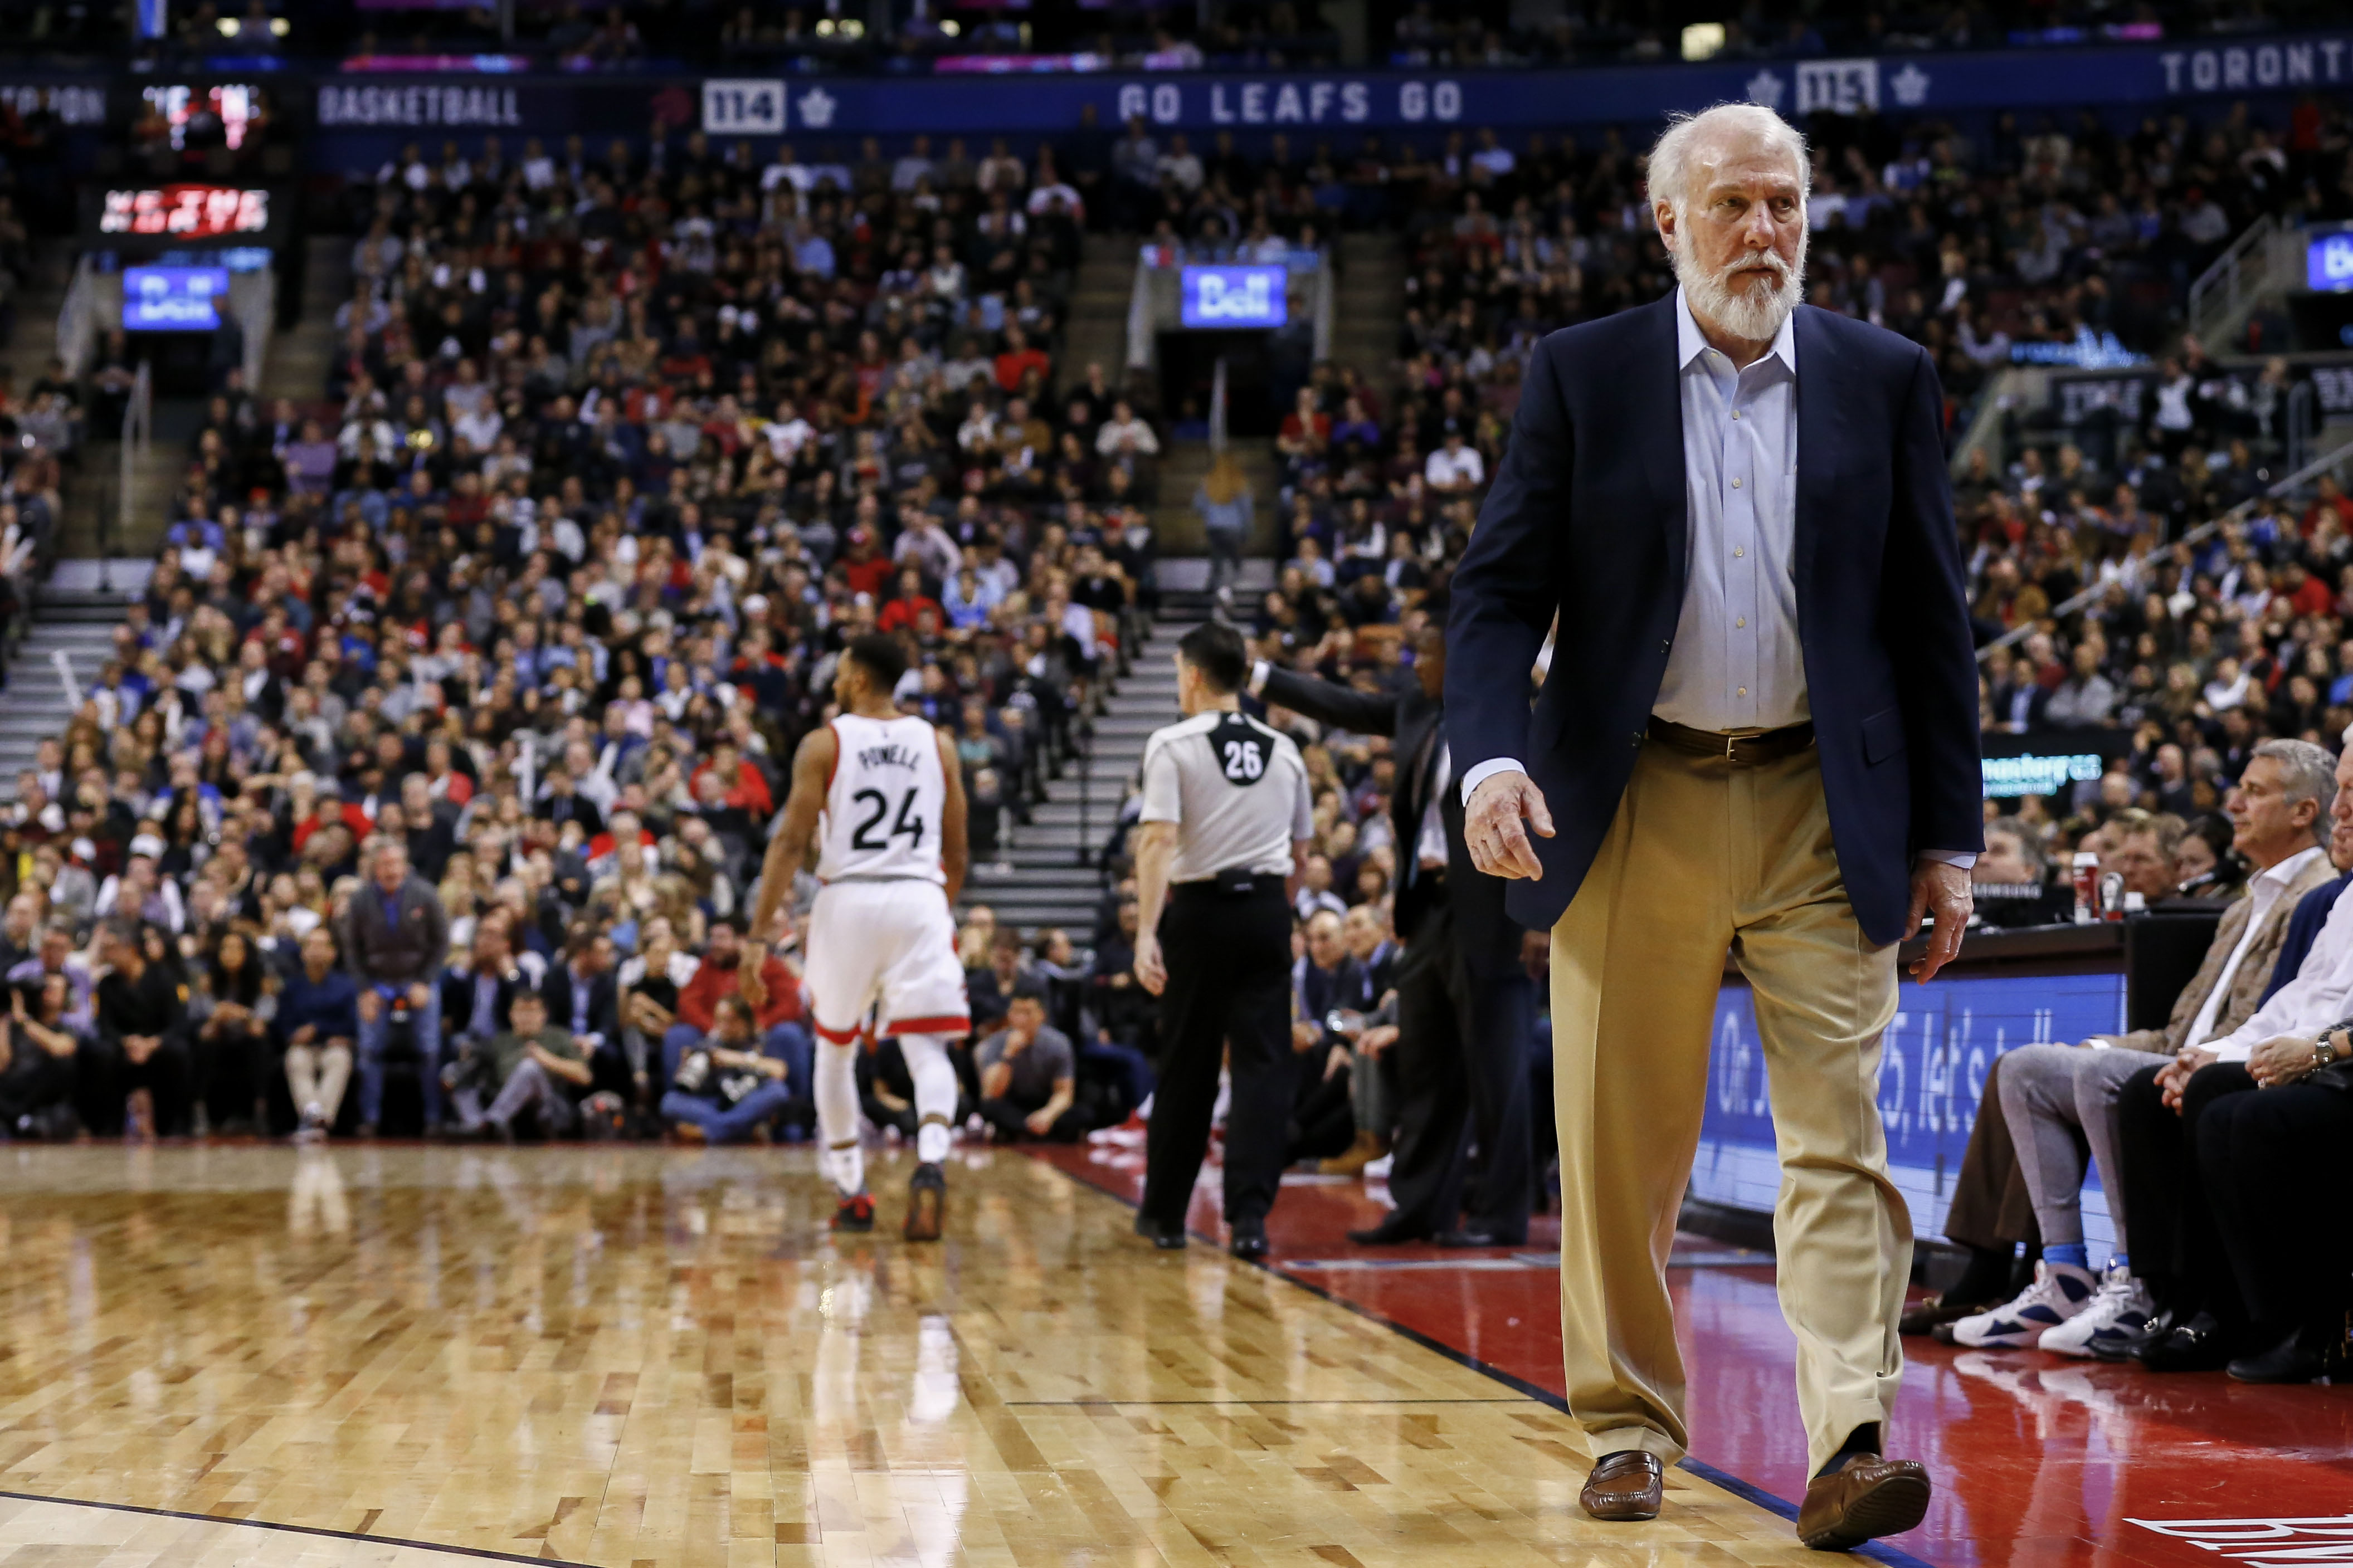 Jan 24, 2017; Toronto, Ontario, CAN; San Antonio Spurs head coach Gregg Popovich walks back to the bench in the second half at an NBA game against the Toronto Raptors at Air Canada Centre. The Spurs won 108-106. Mandatory Credit: Kevin Sousa-USA TODAY Sports